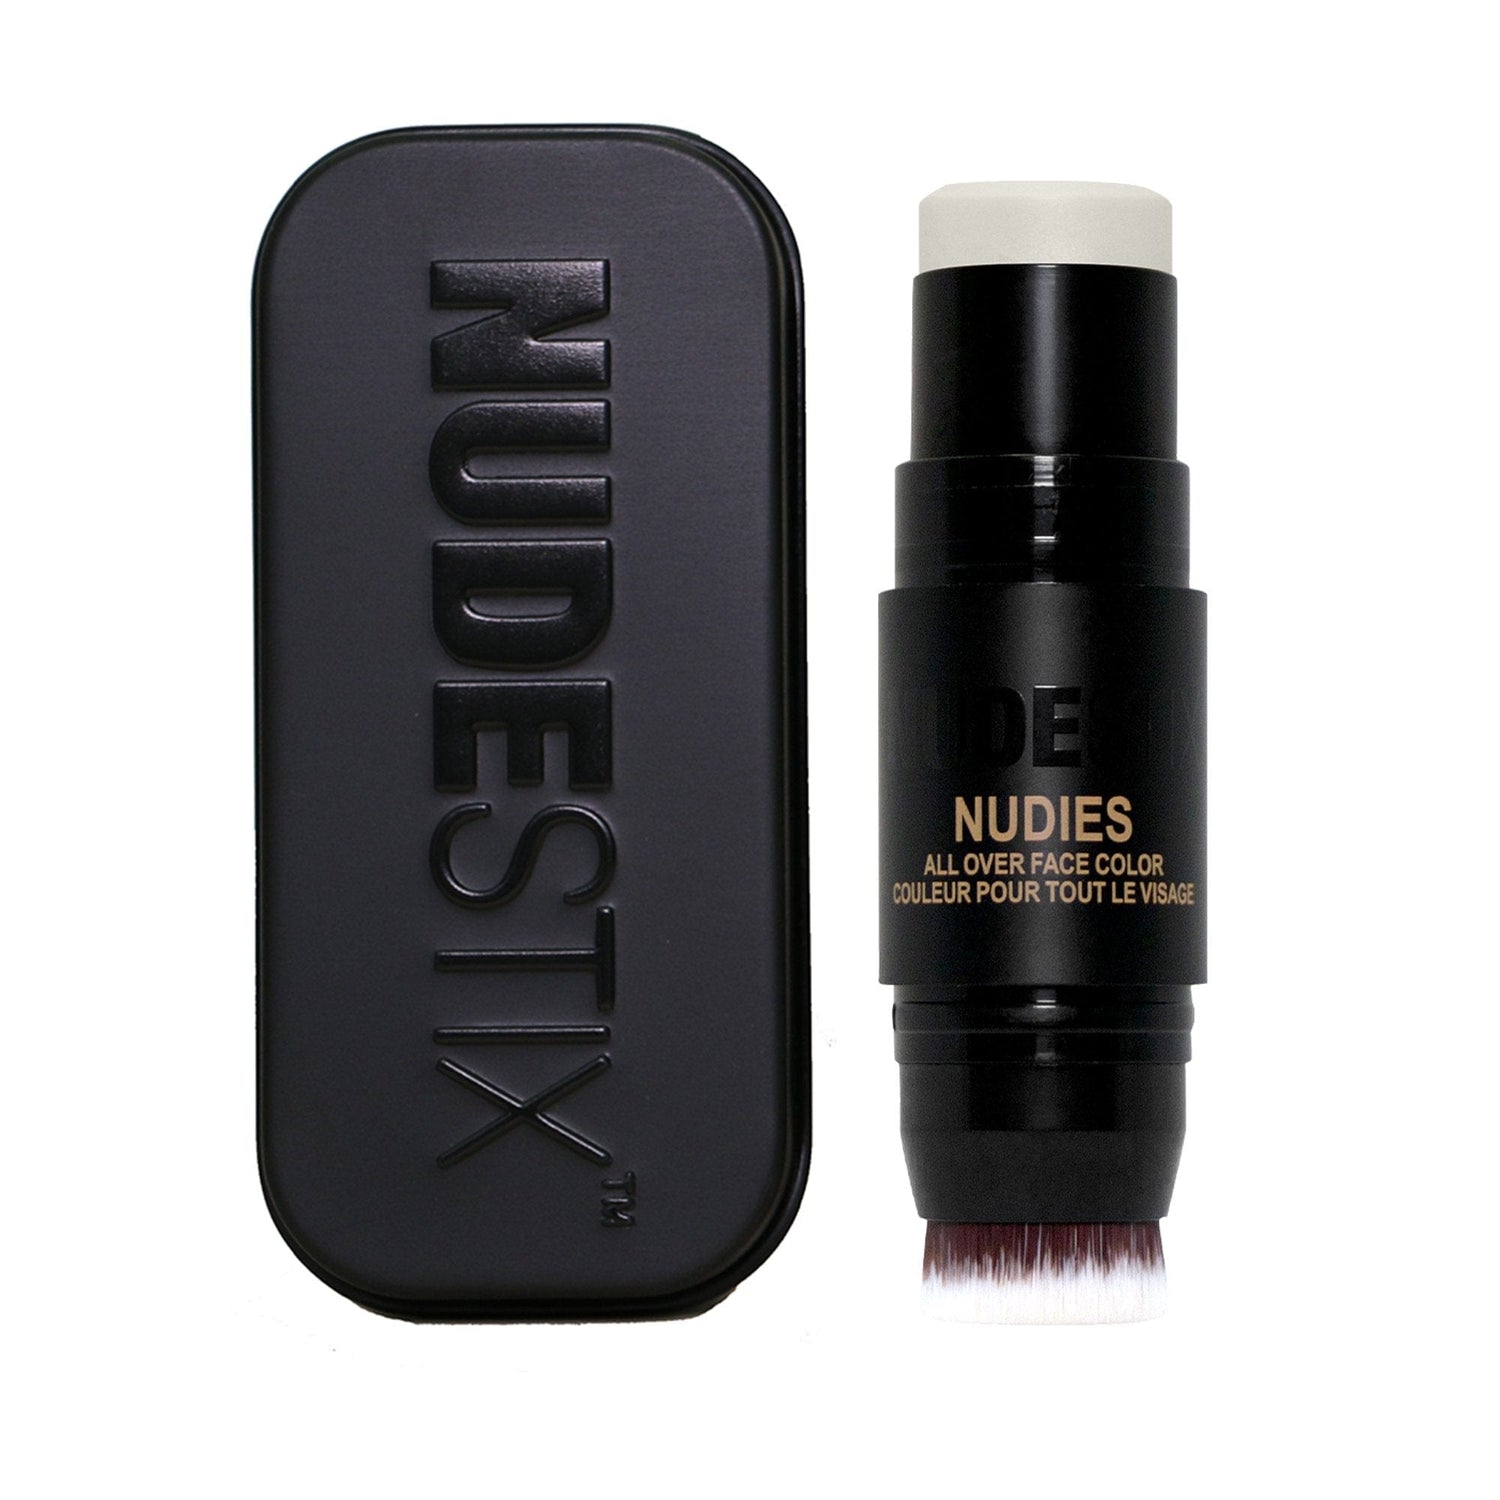 Nudies Glow stick in shade Ice Ice Baby and Nudestix can